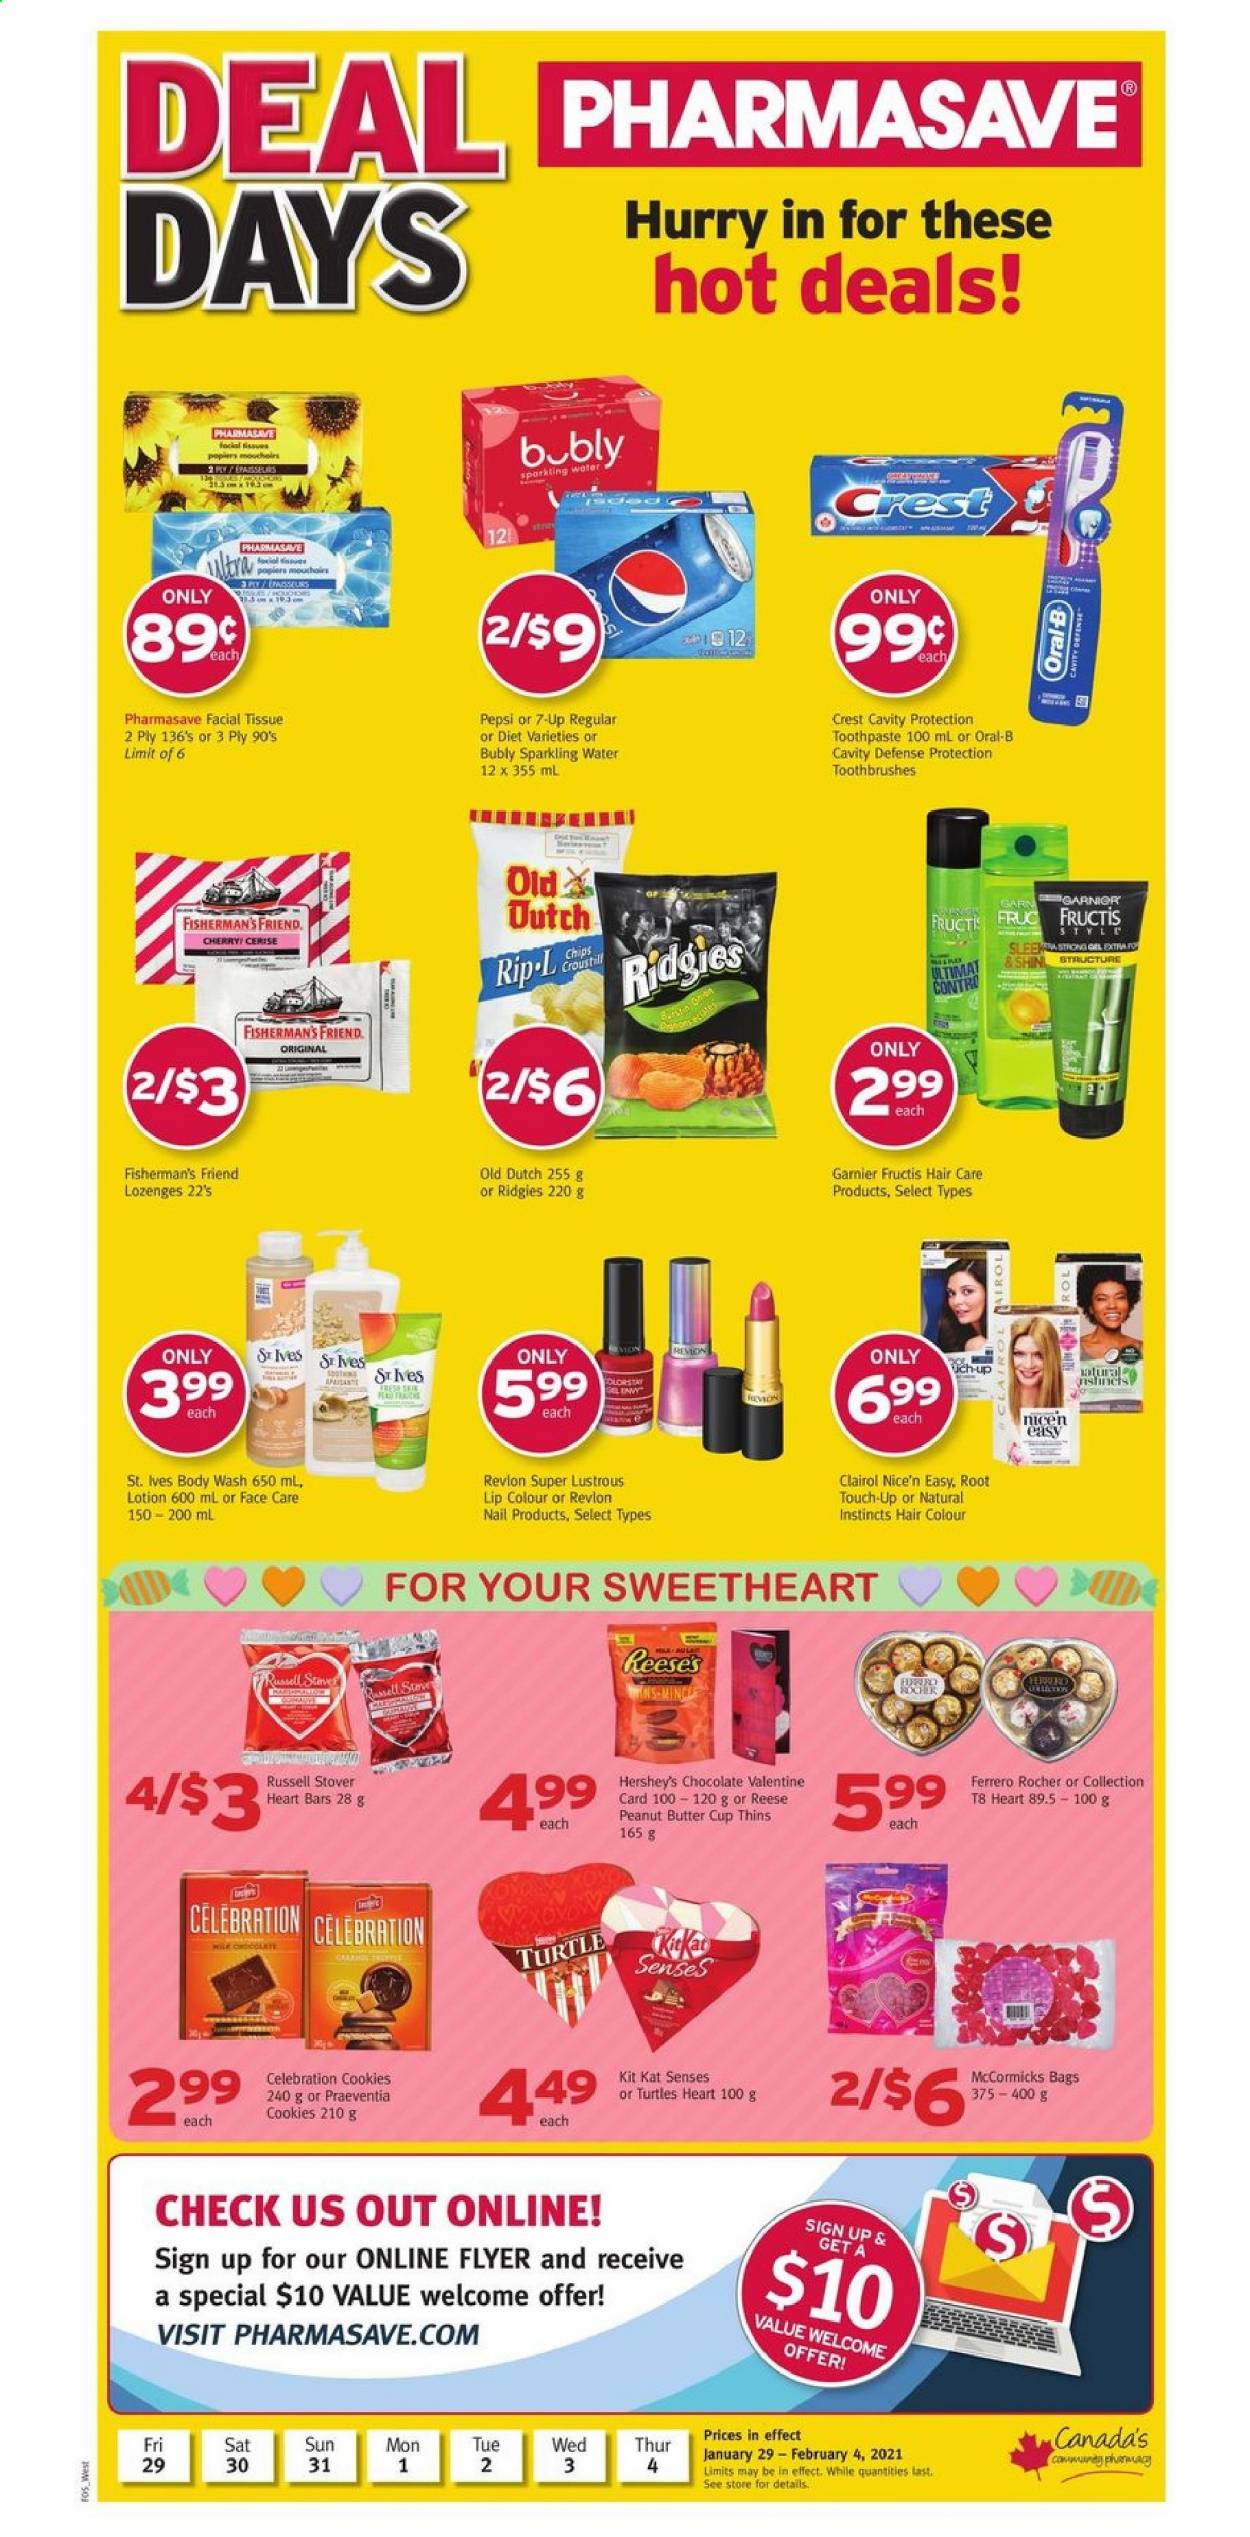 thumbnail - Pharmasave Flyer - January 29, 2021 - February 04, 2021 - Sales products - Reese's, Hershey's, cookies, chocolate, KitKat, Celebration, peanut butter cups, Thins, peanut butter, Pepsi, 7UP, sparkling water, tissues, body wash, toothpaste, Crest, Root Touch-Up, Clairol, Revlon, hair color, Fructis, body lotion, bag, cup, Garnier, Oral-B, chips. Page 1.